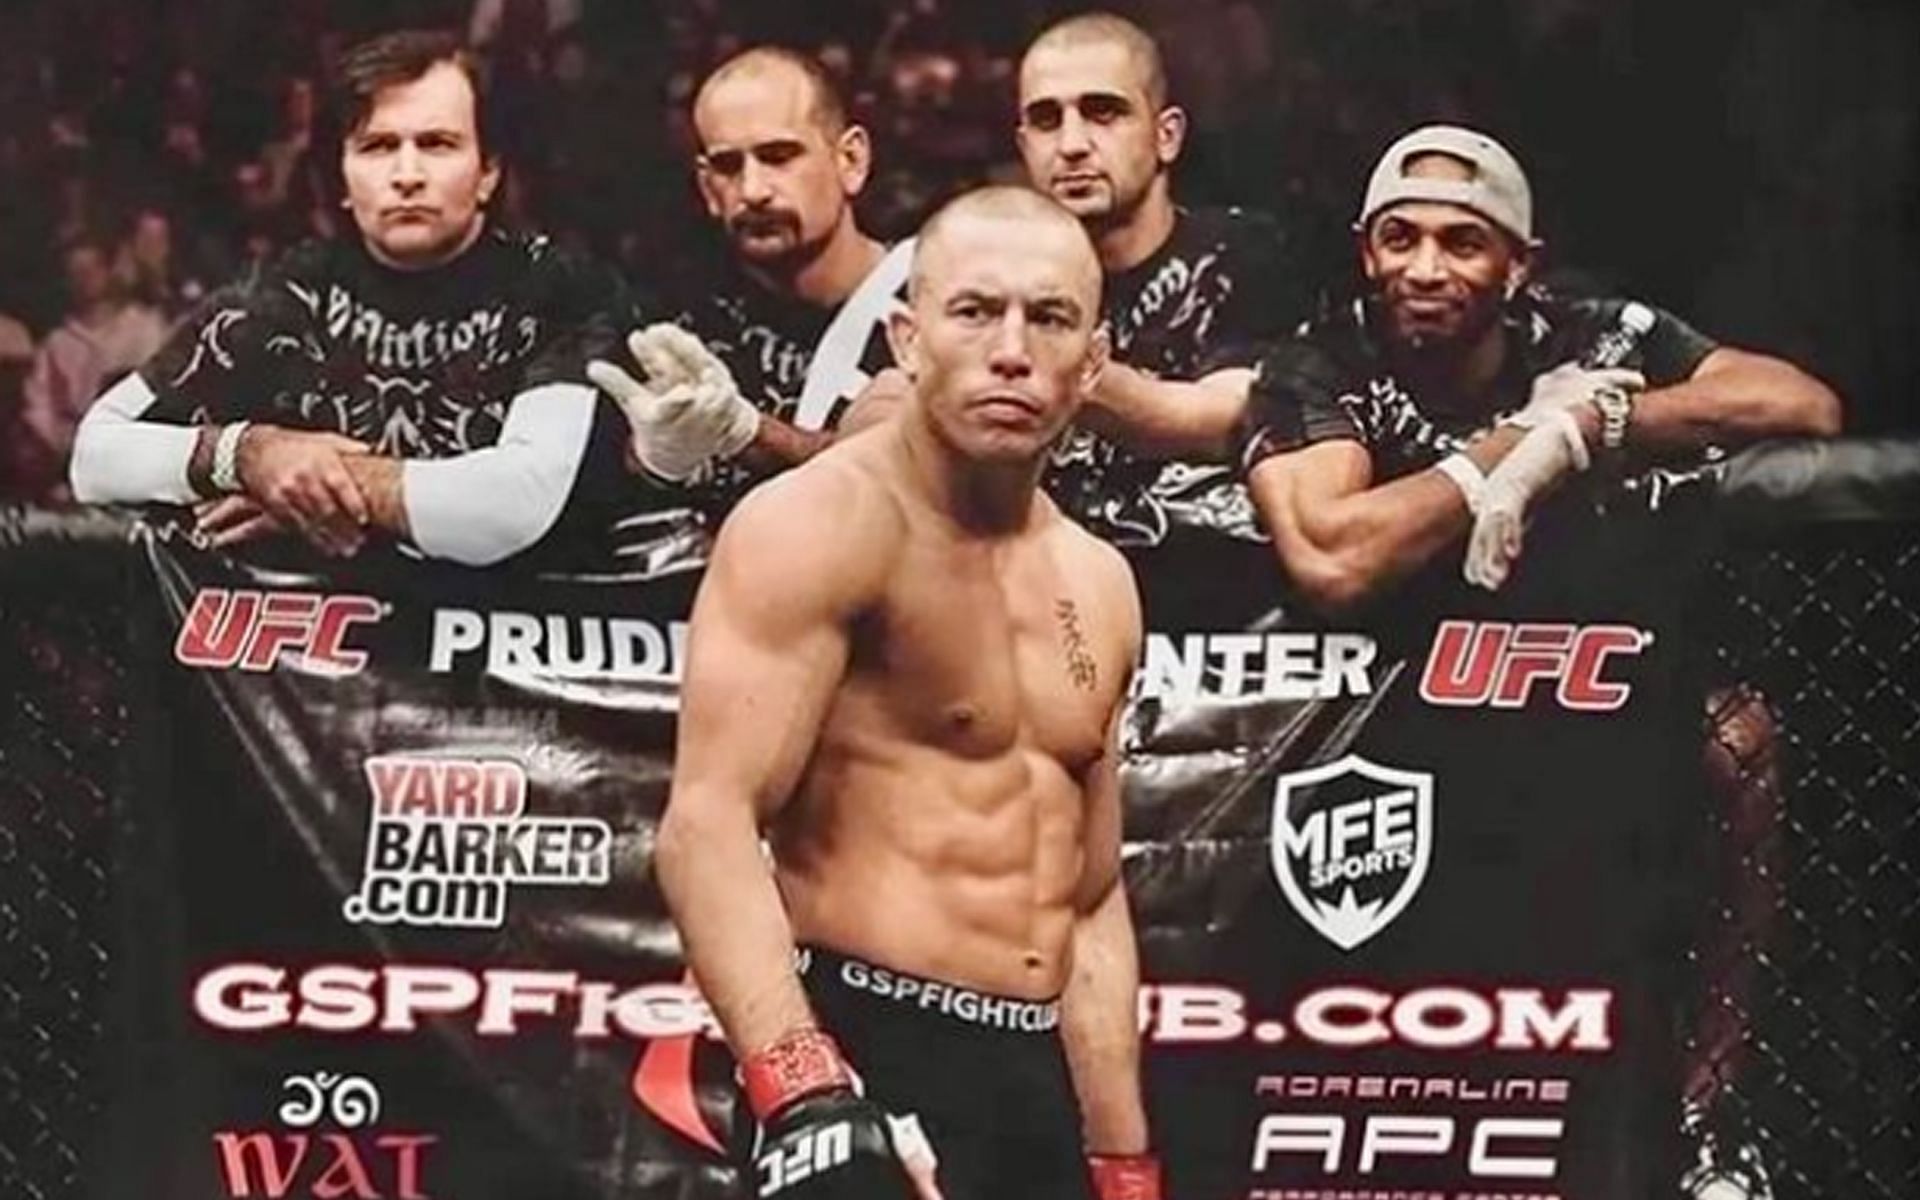 UFC has produced several great champions like Georges St-Pierre [Image Courtesy: @georgesstpierre Instagram]